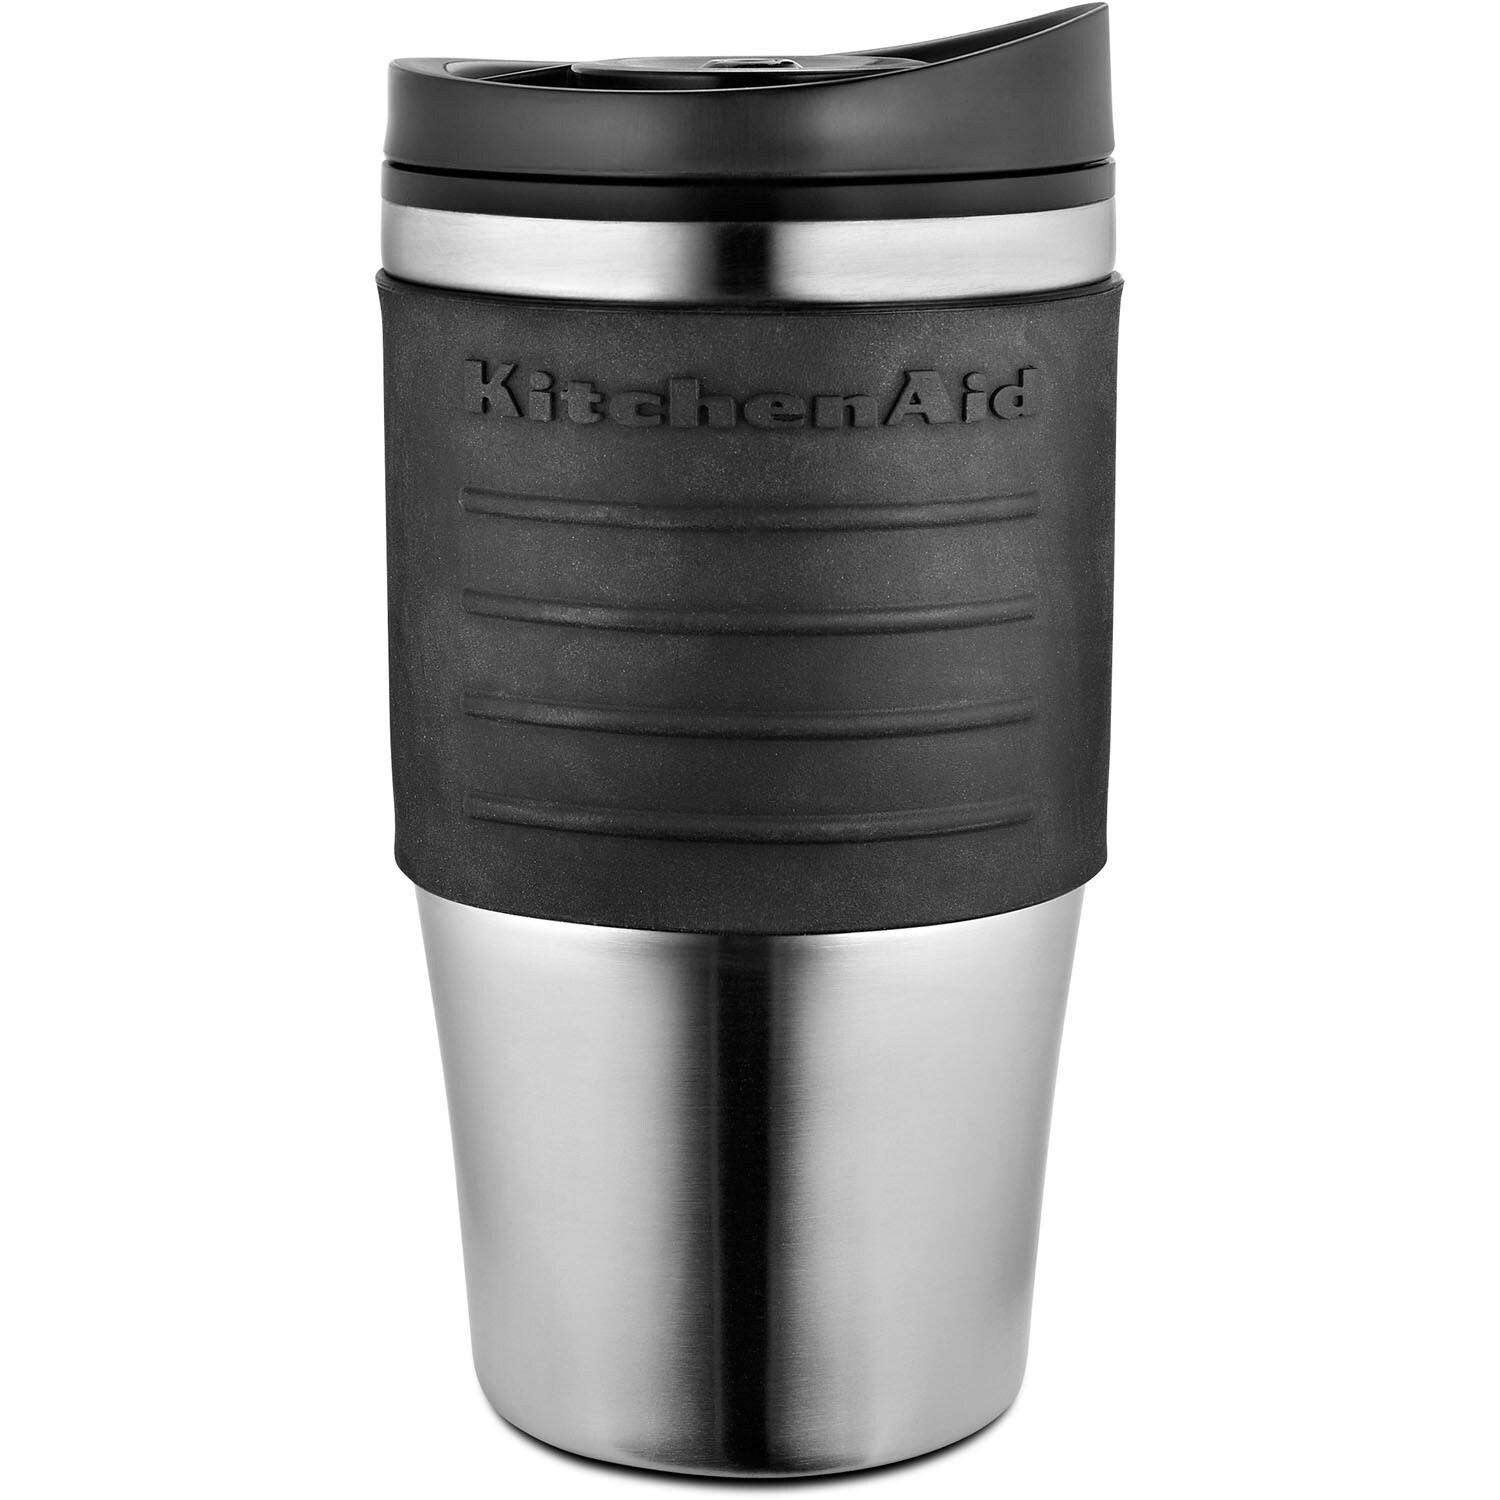 https://ak1.ostkcdn.com/images/products/11372008/KitchenAid-KCM0402ACS-4-Cup-Personal-Coffee-Maker-with-Multifunctional-Thermal-Mug-Cocoa-Silver-4d358b9e-2a9e-46db-b146-8cceb73ff727.jpg